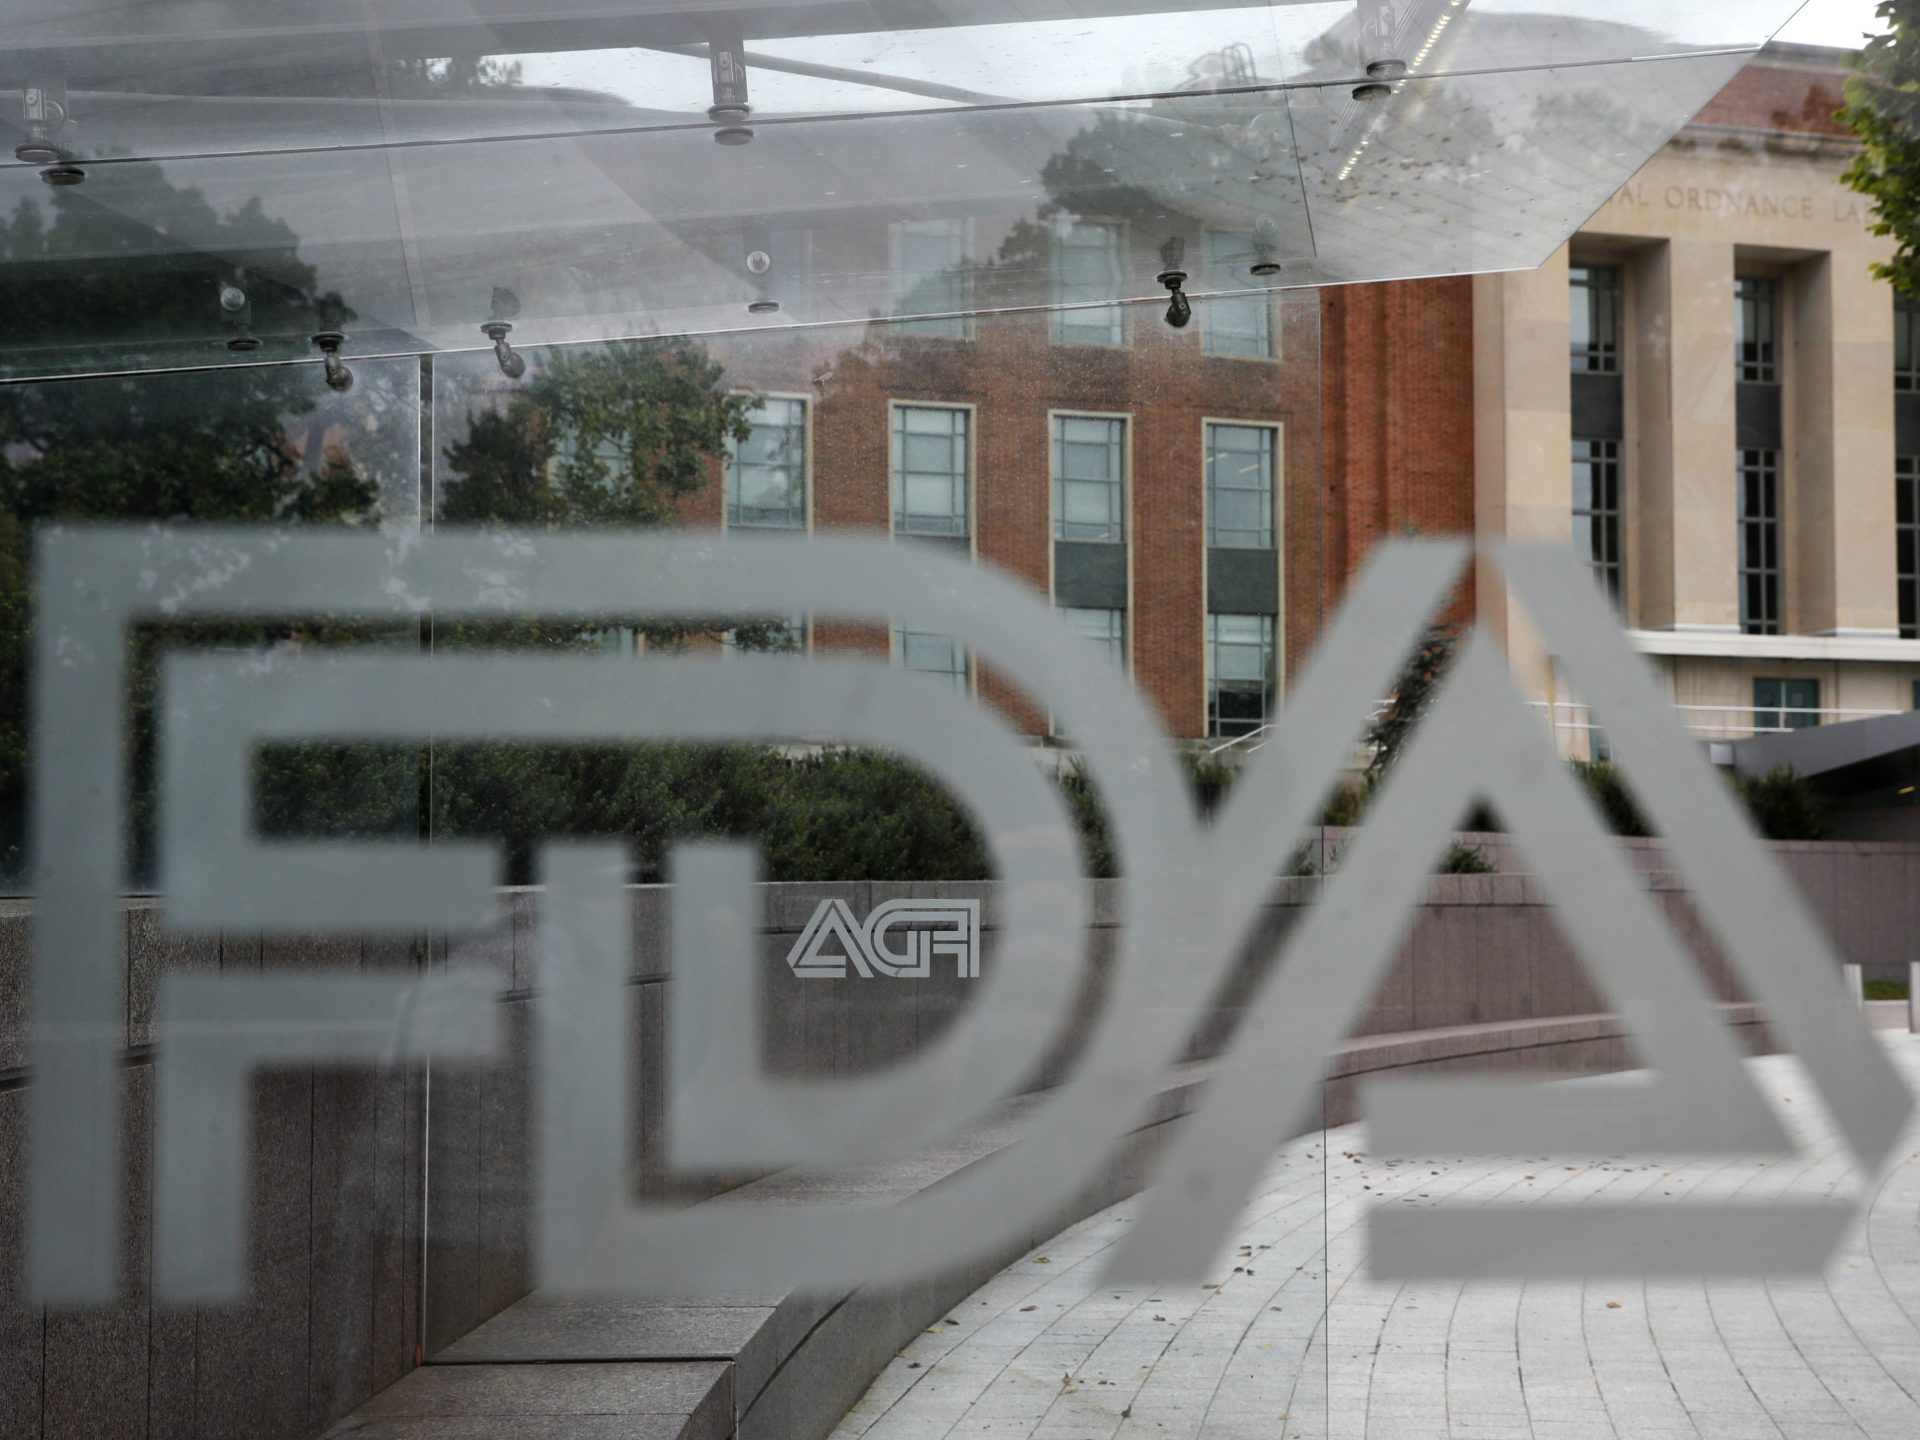 FILE PHOTO: This Thursday, Aug. 2, 2018, file photo shows the U.S. Food and Drug Administration building behind FDA logos at a bus stop on the agency's campus in Silver Spring, Md.